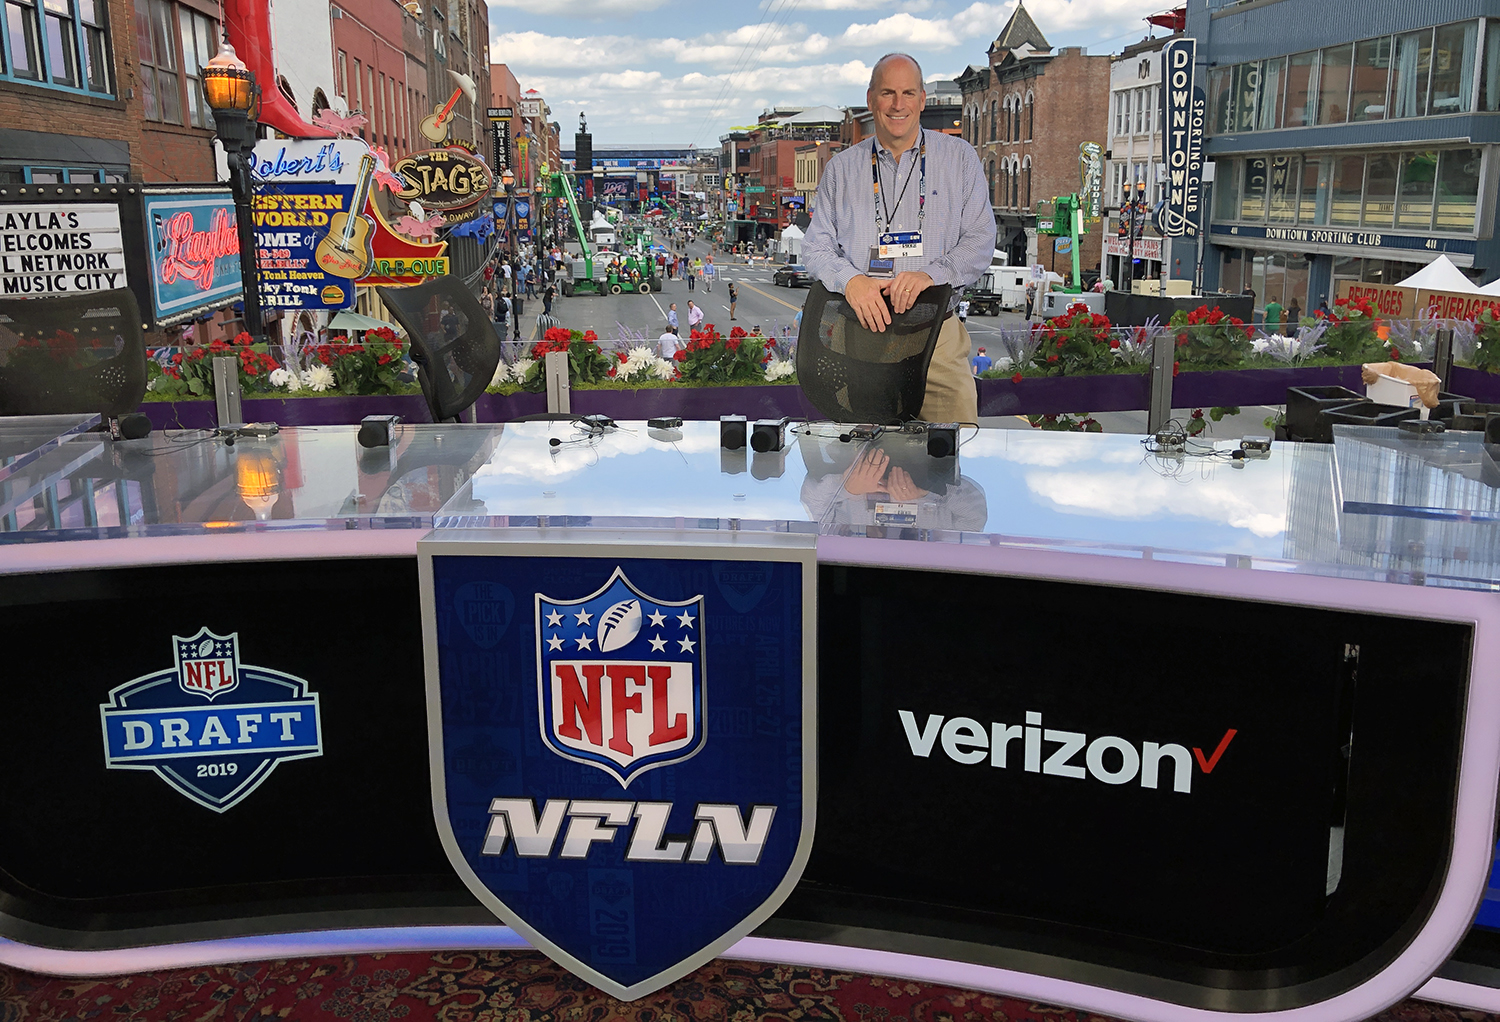 Live From the NFL Draft: NFL Media Gets into Honky-Tonk Groove With Massive  Operation in Nashville